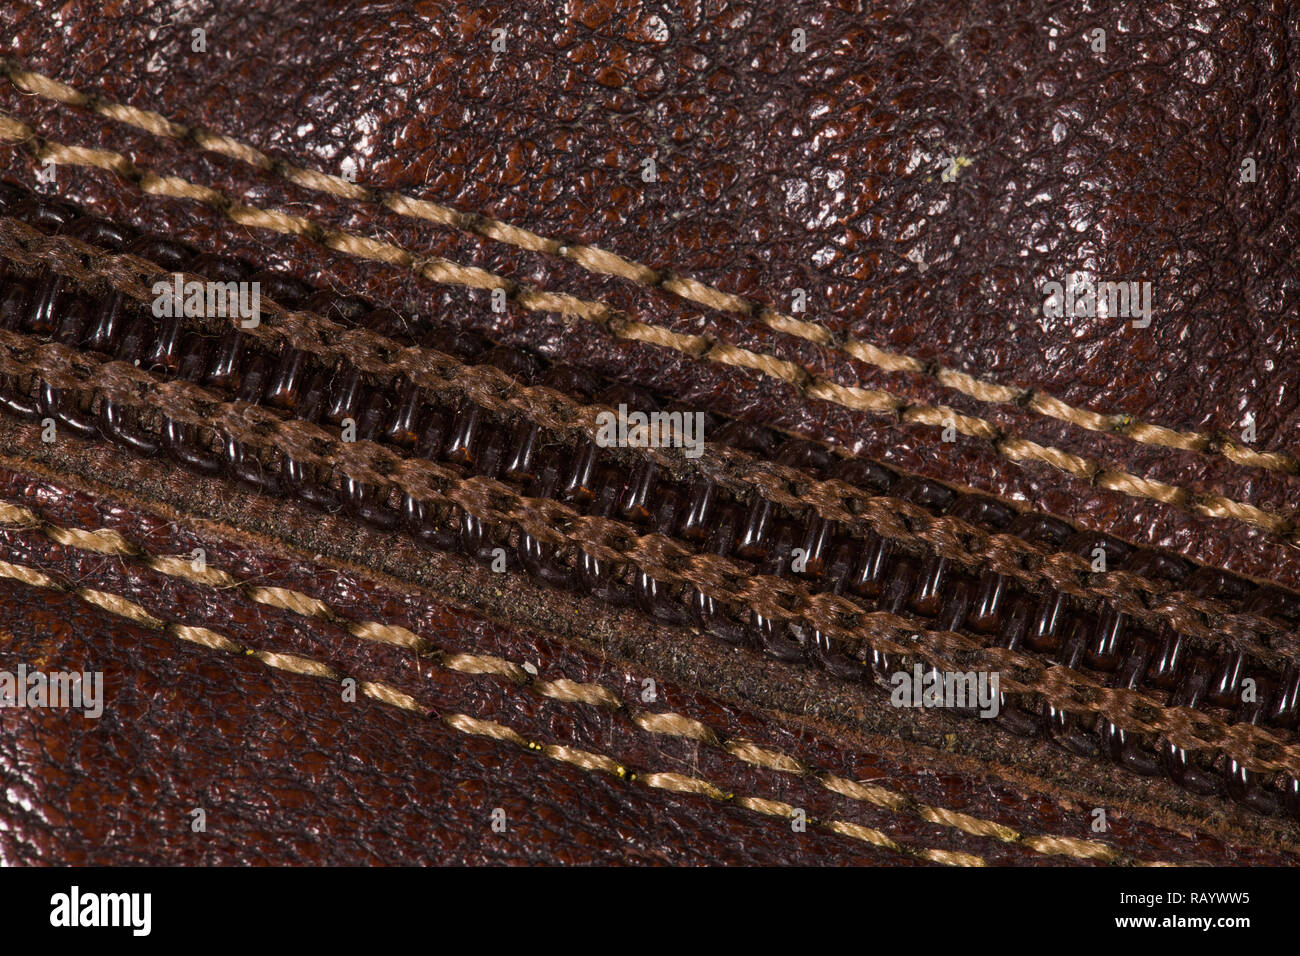 Closeup top view of leather brown closed zipper and brown natural leather material. Macro of details of footwear. Horizontal color photography. Stock Photo